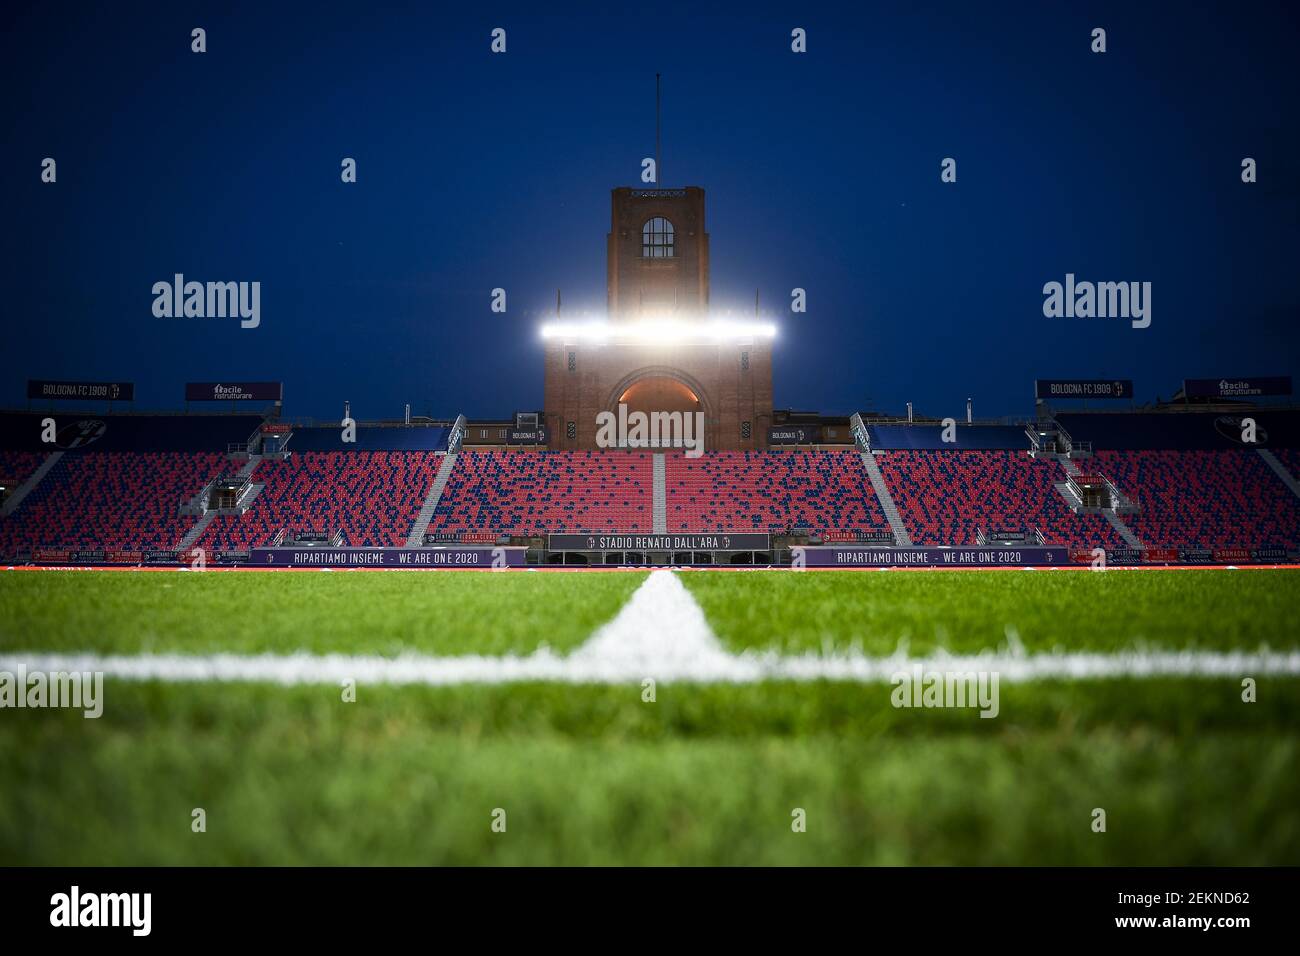 BOLOGNA, ITALY - September 28, 2020: A general view shows empty stadio Renato Dell'Ara prior to the Serie A match between FC and Parma Bologna won 4-1 over